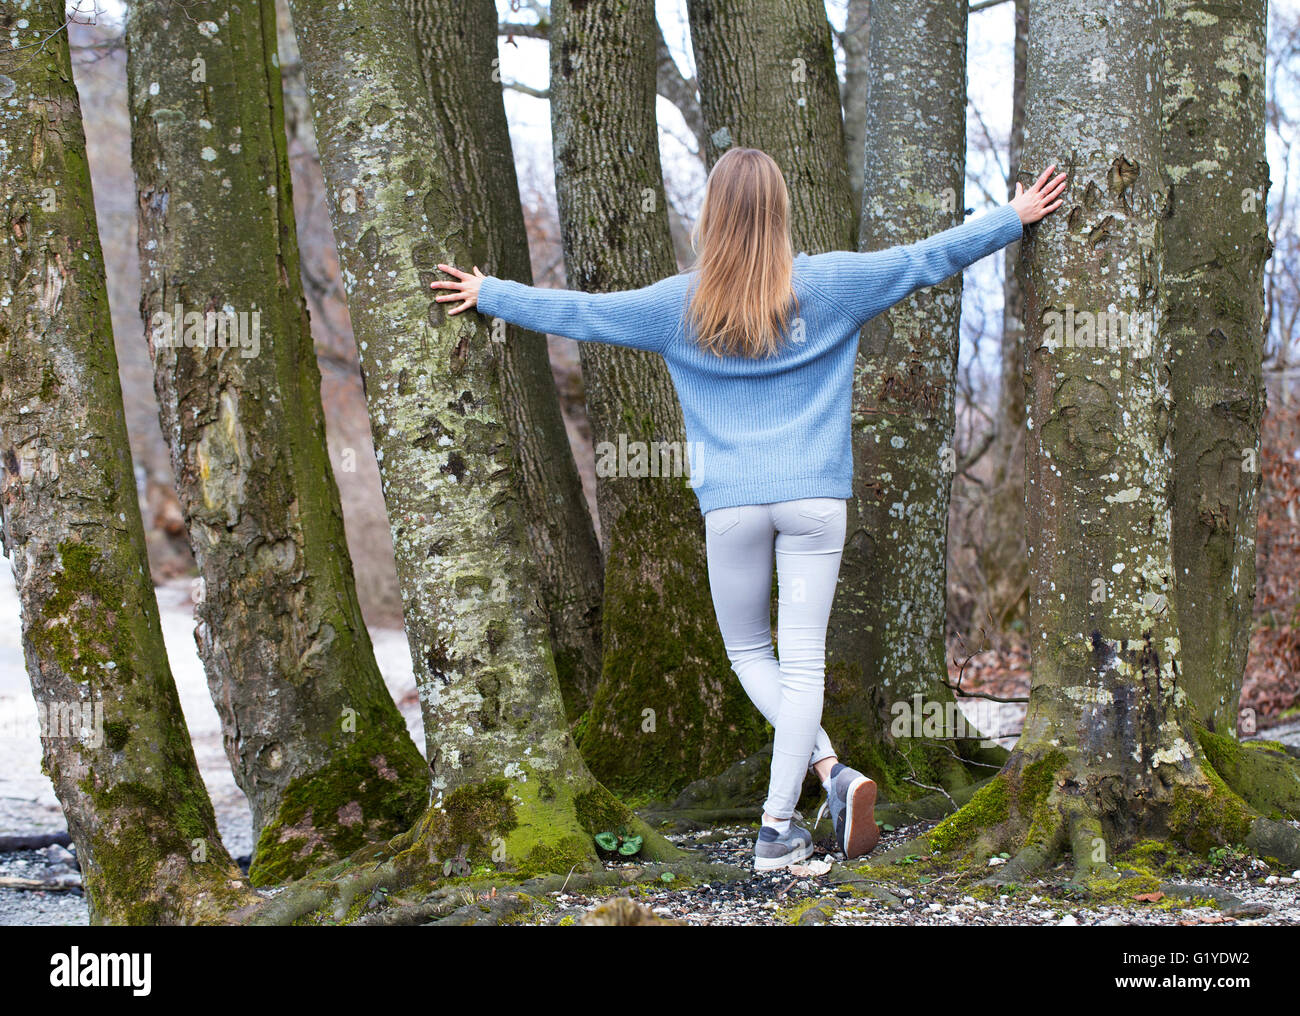 Young girl from behind with long blond hair leaning on trees Stock Photo